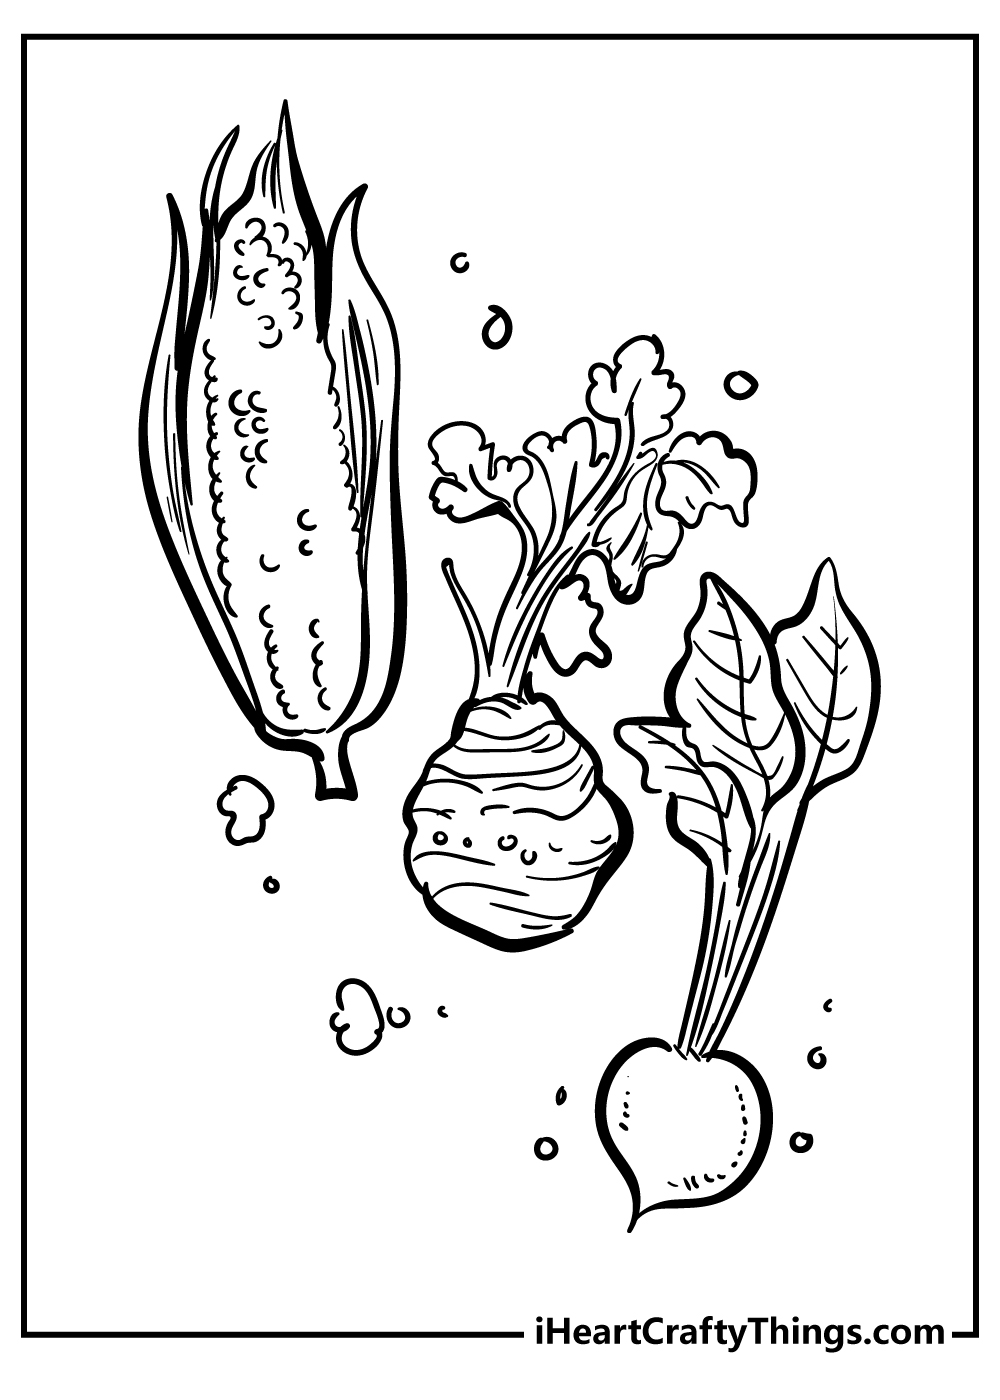 Vegetables Coloring Pages free pdf download